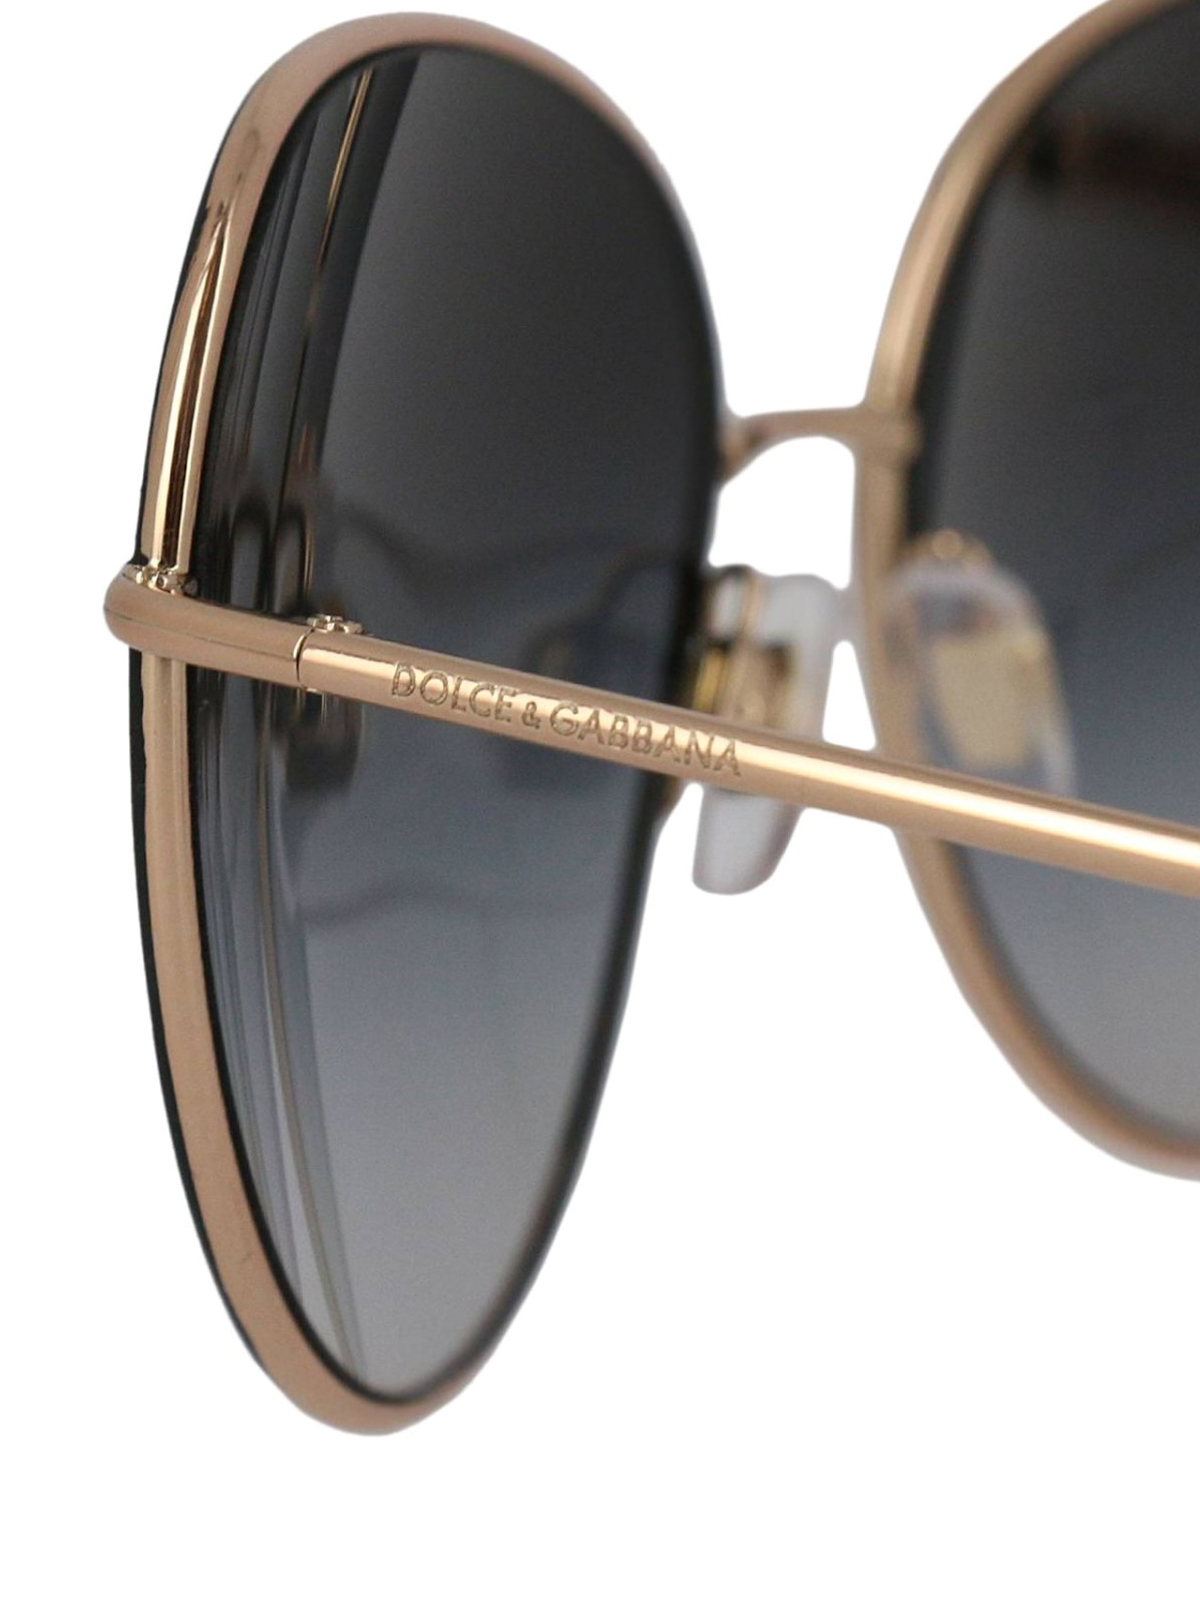 dolce and gabbana black and gold sunglasses